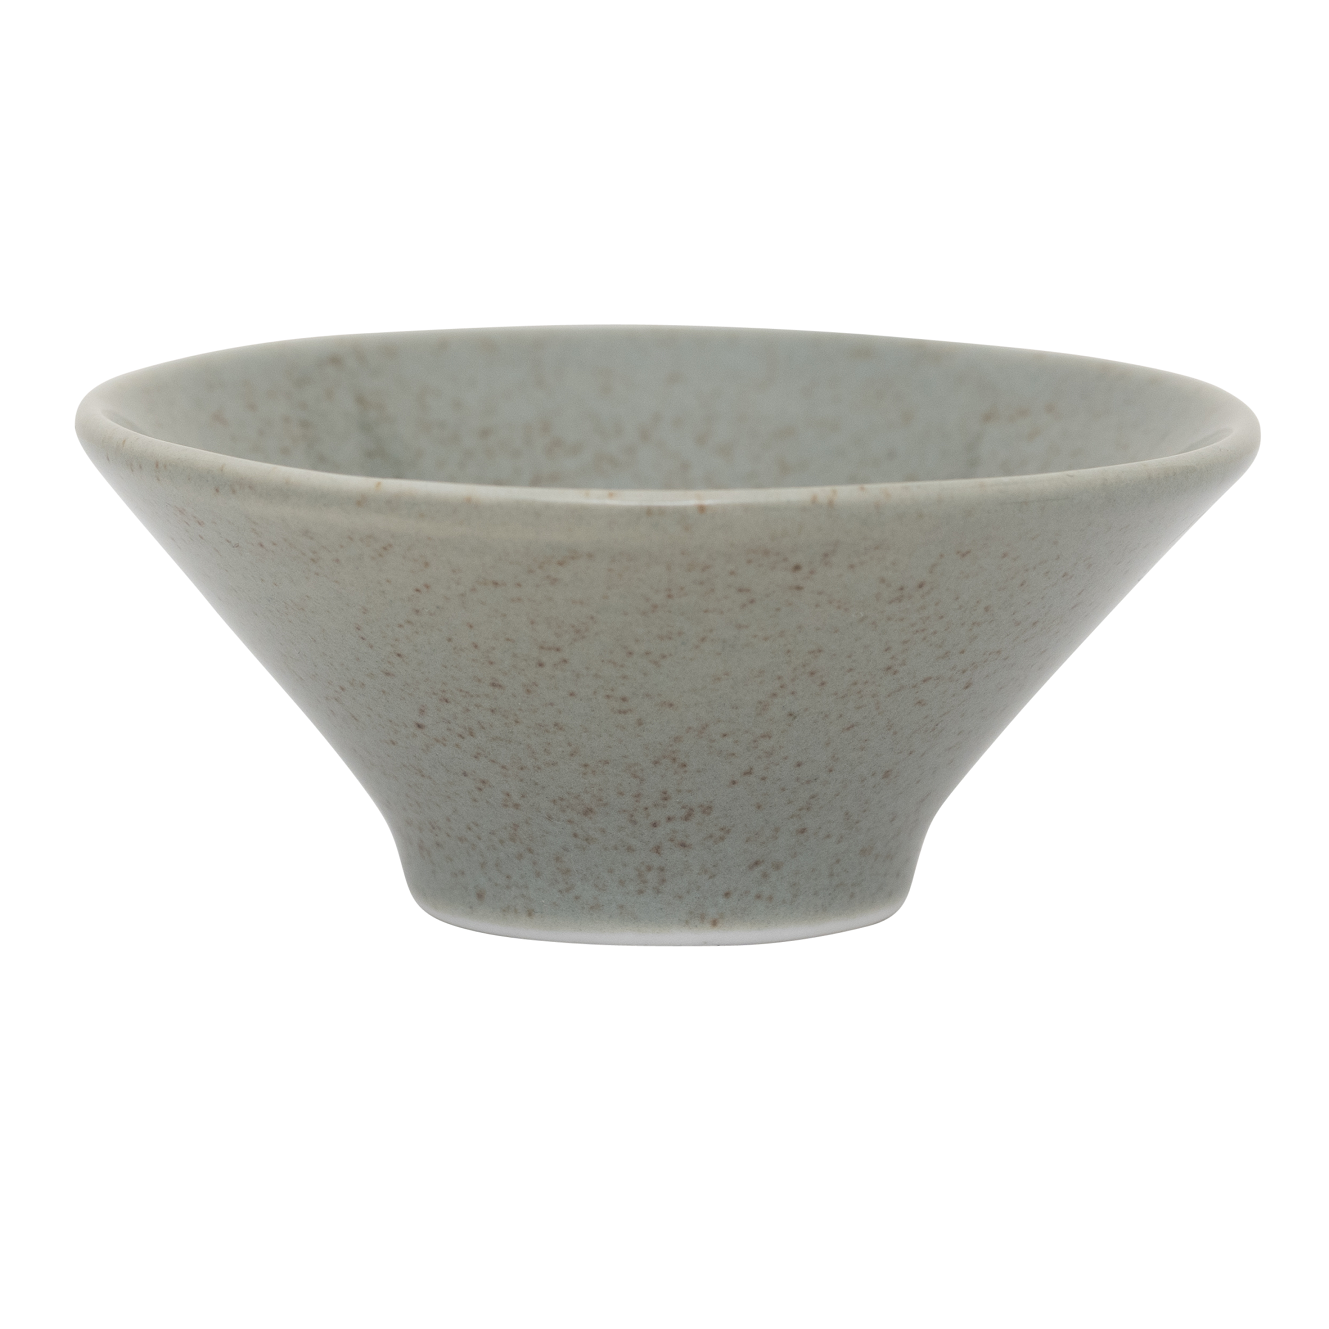 Unc Dipping Bowl Ogawa S Sea Grass Gift